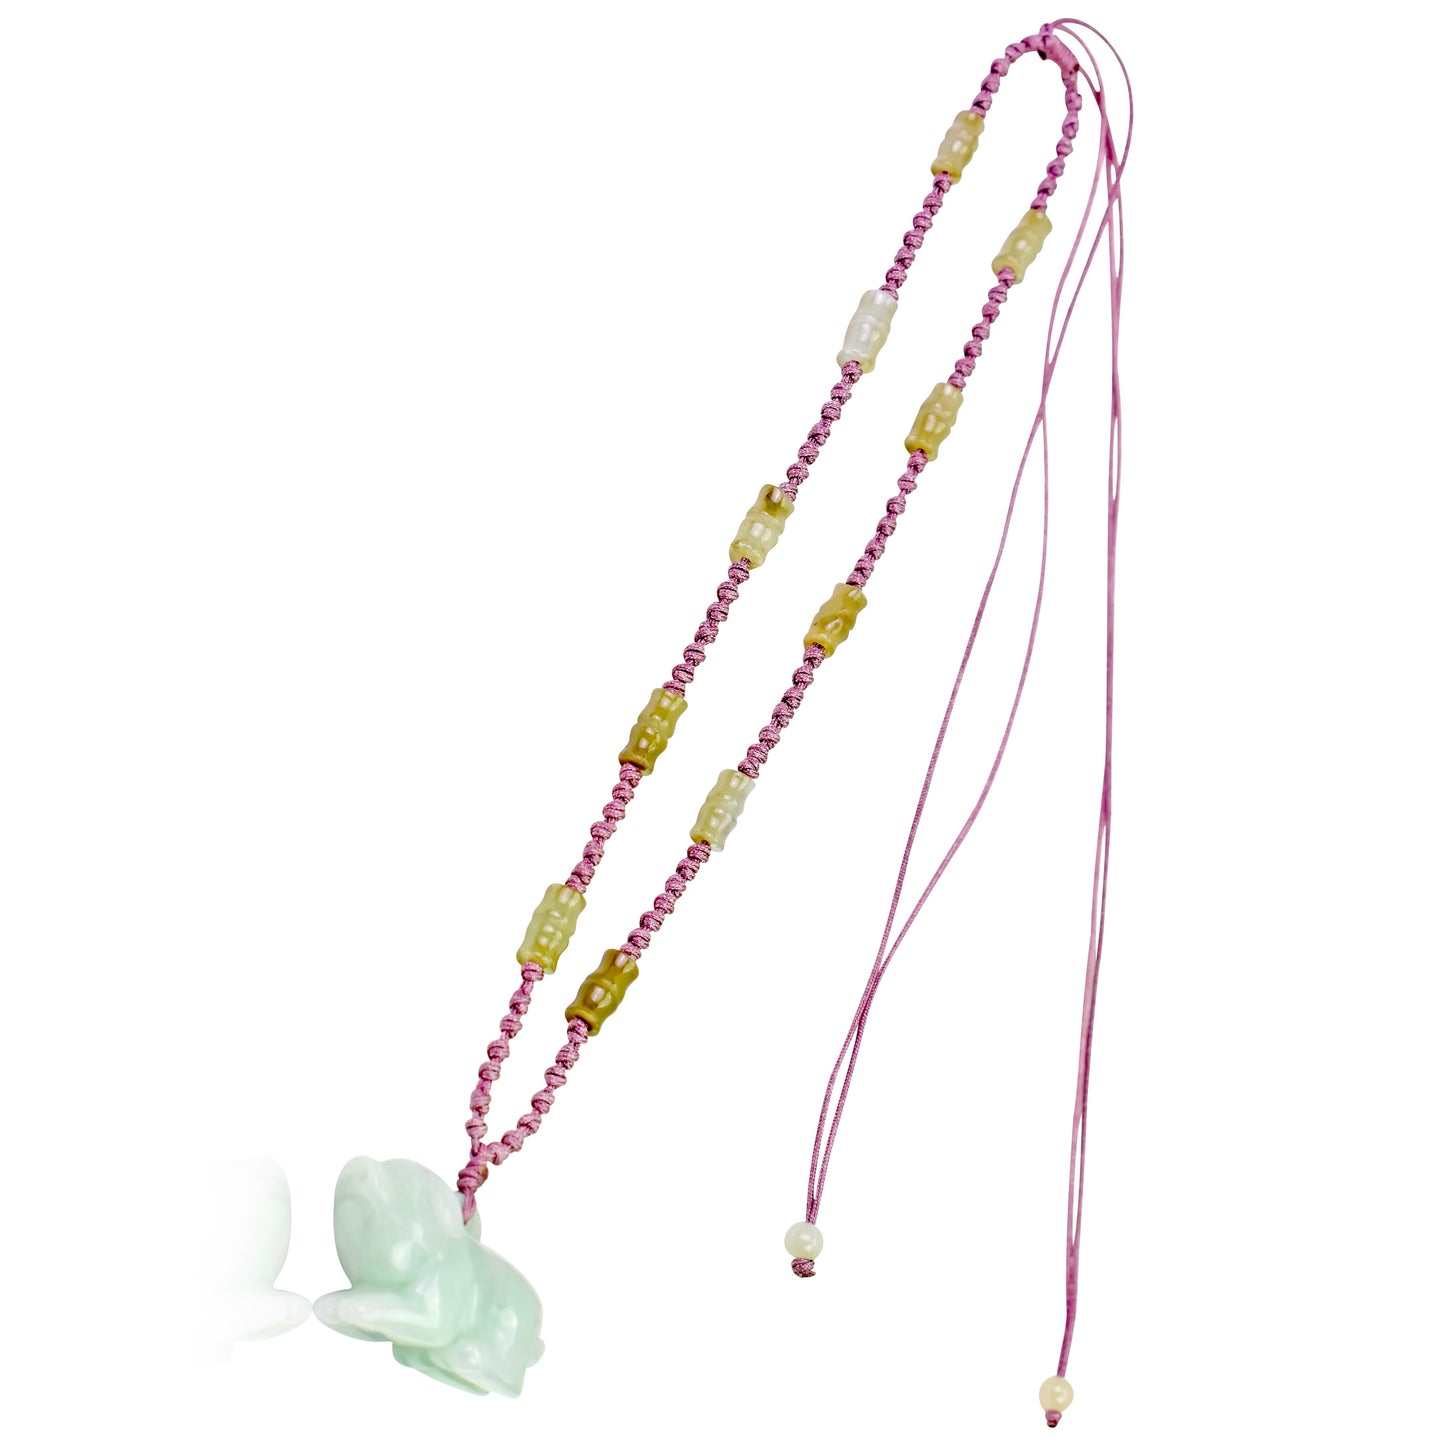 Add a Touch of Elegance with Boar Chinese Zodiac Jade Necklace made with Lavender Cord